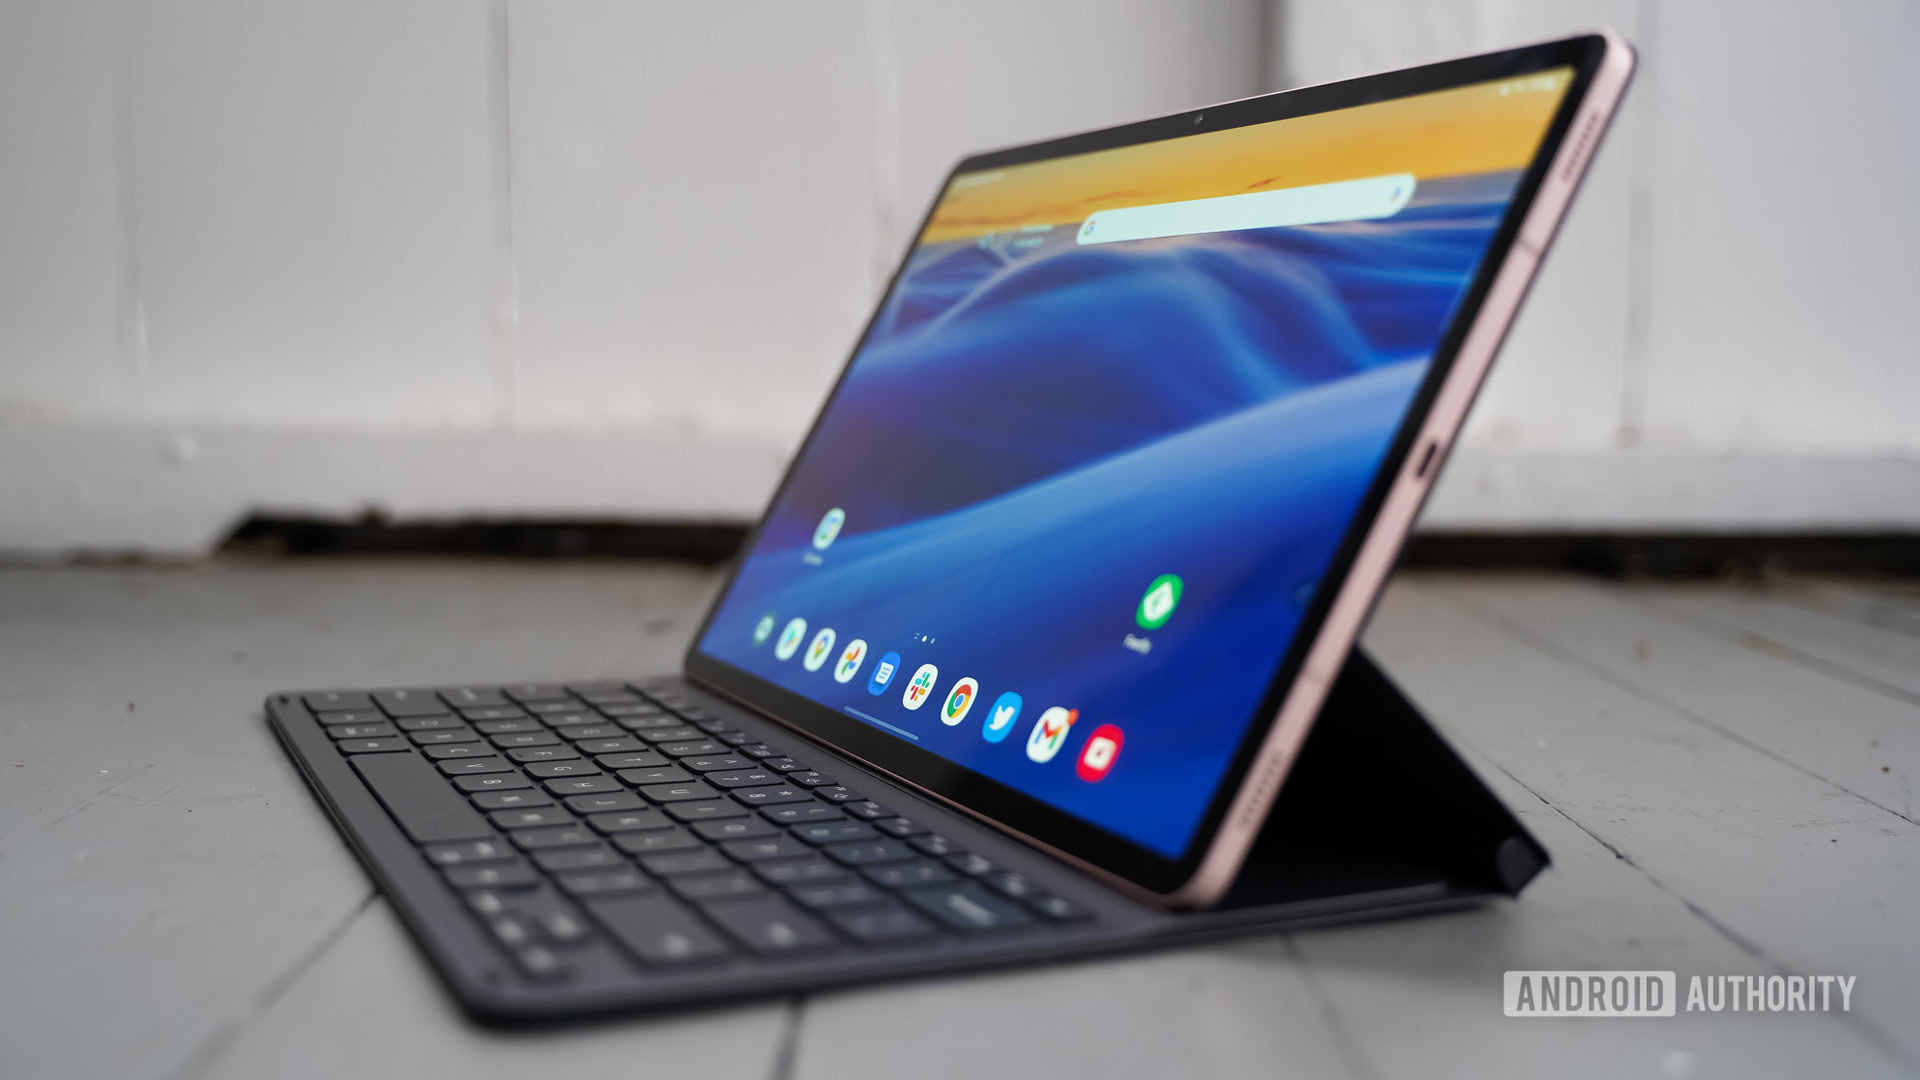 Galaxy Tab S7 vs iPad Pro (2021): Time for Samsung to introspect